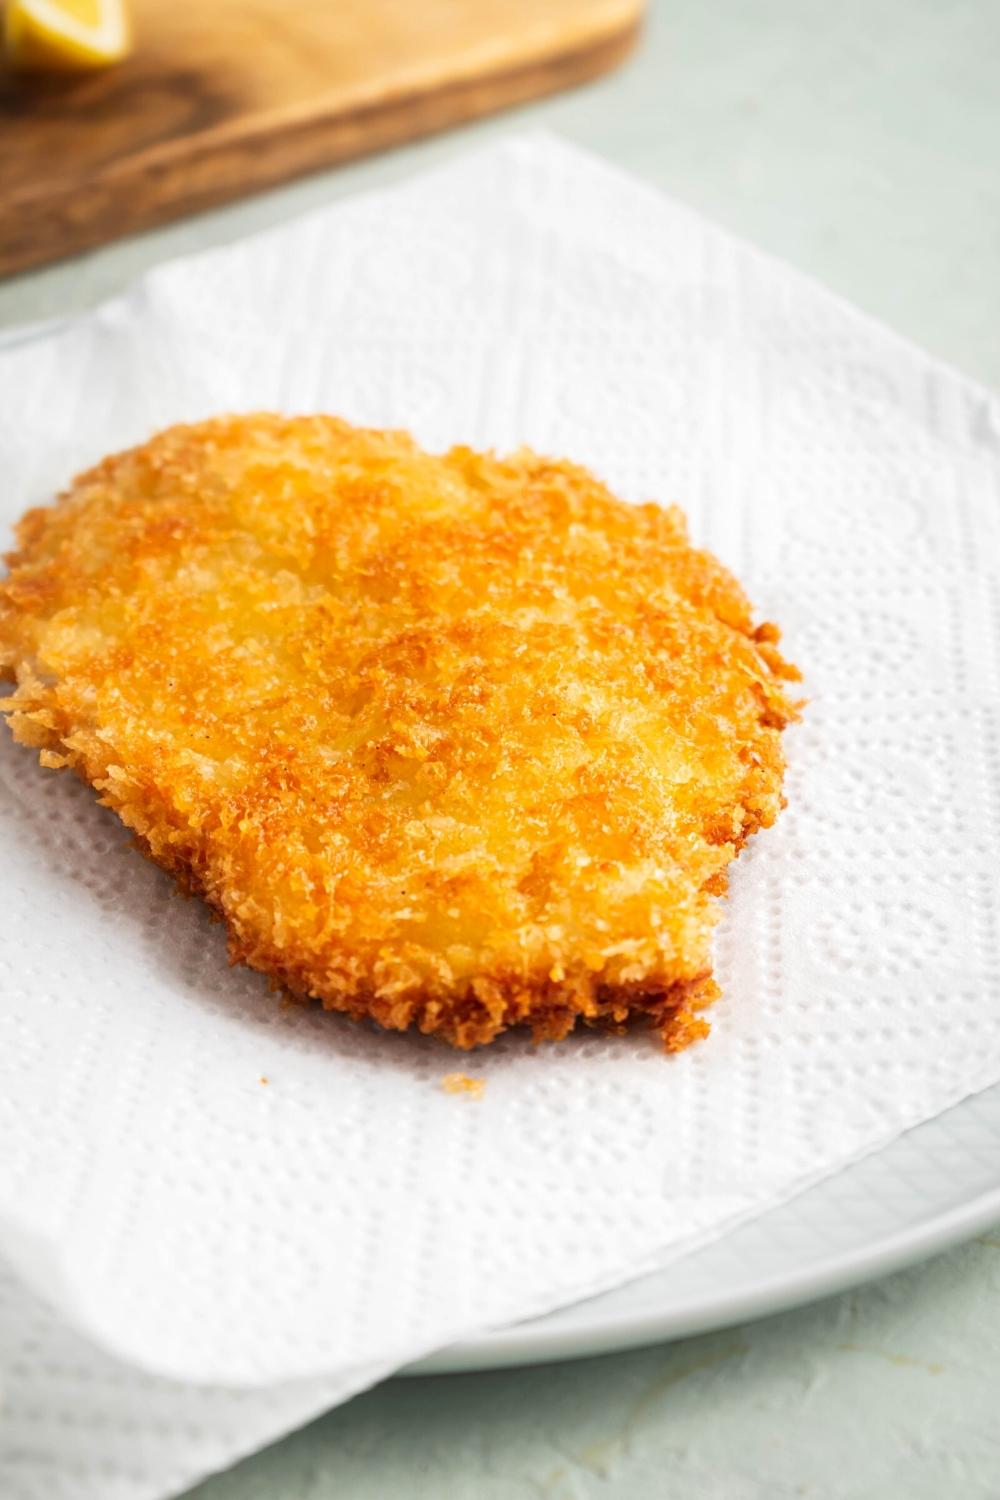 A chicken cutlet on a paper towel lined plate.